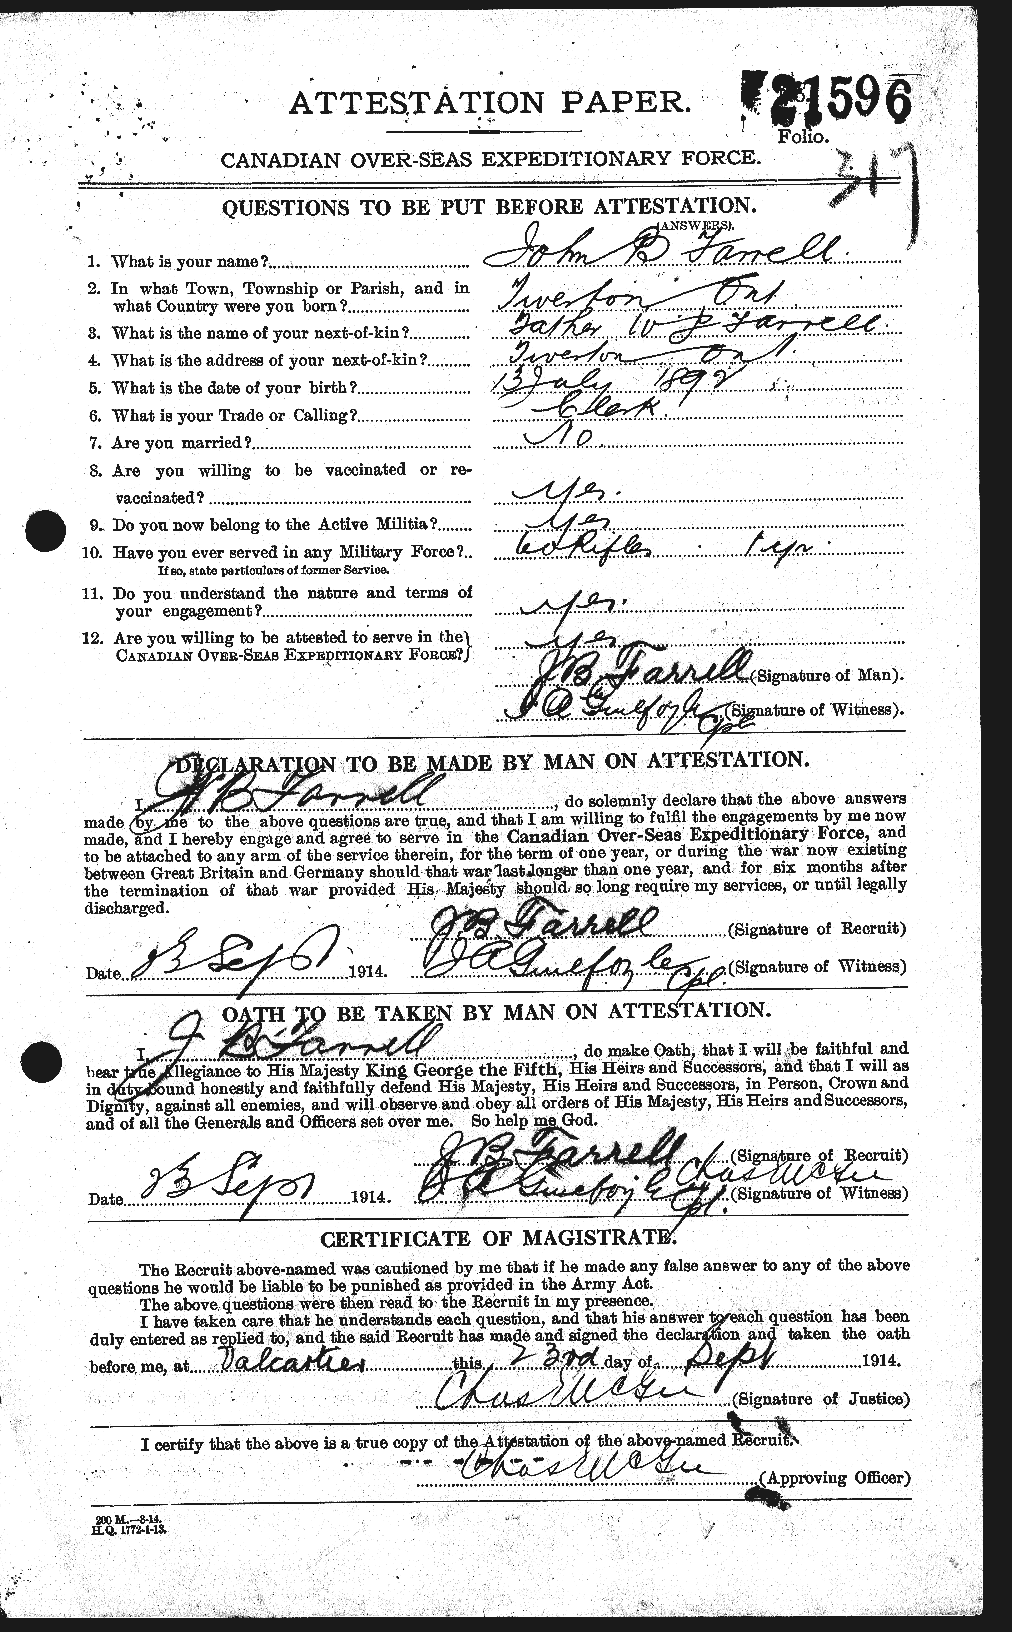 Personnel Records of the First World War - CEF 323137a